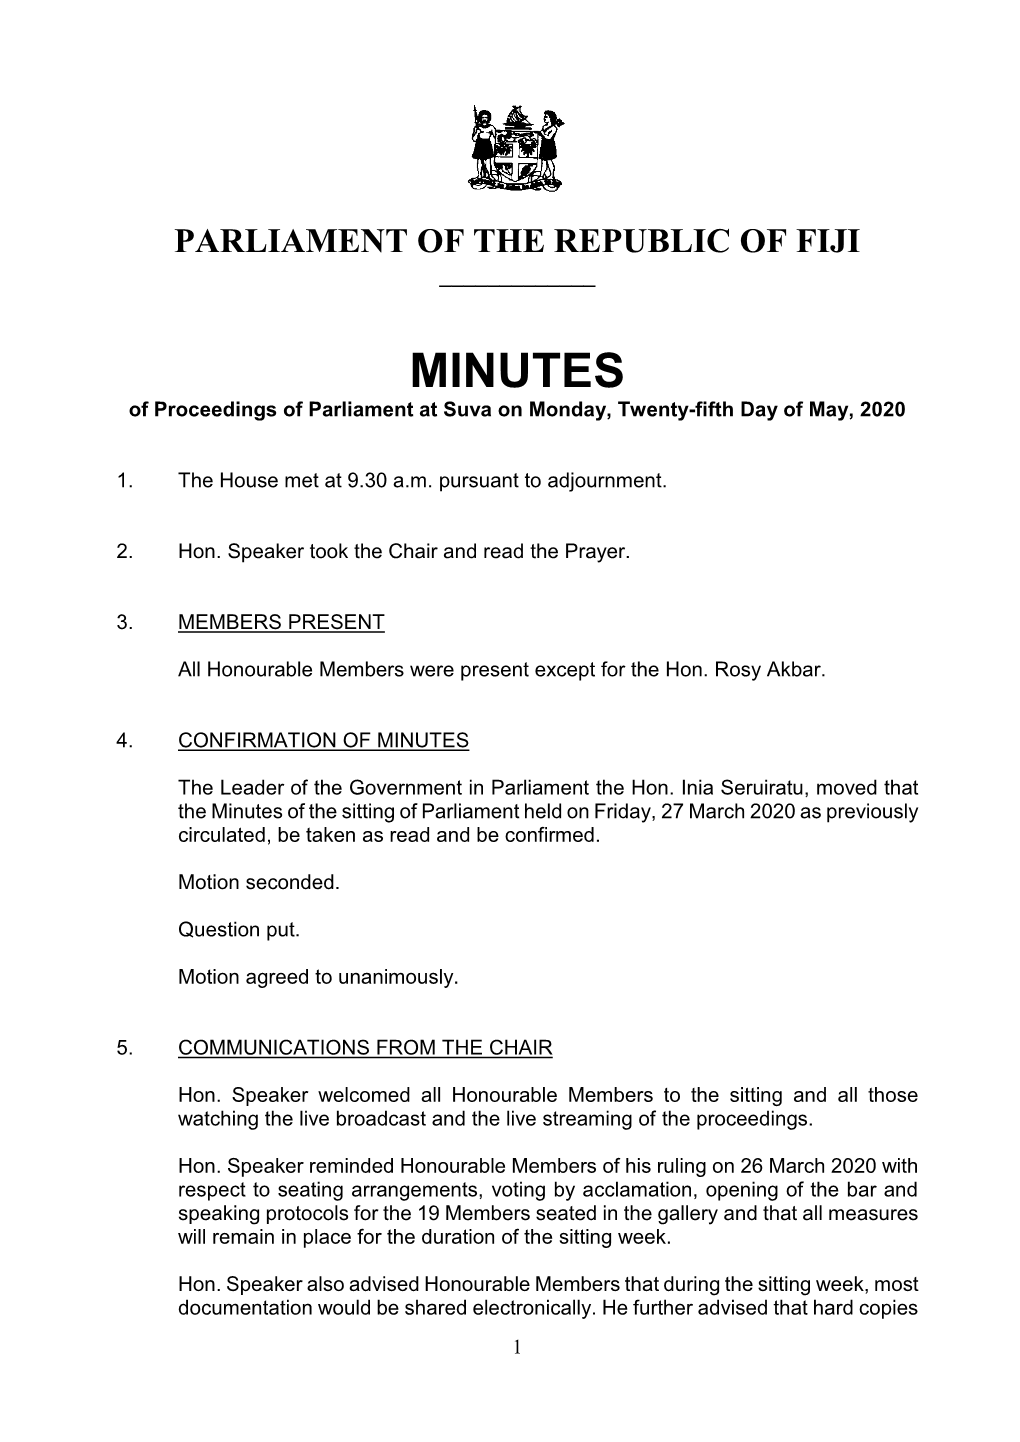 MINUTES of Proceedings of Parliament at Suva on Monday, Twenty-Fifth Day of May, 2020